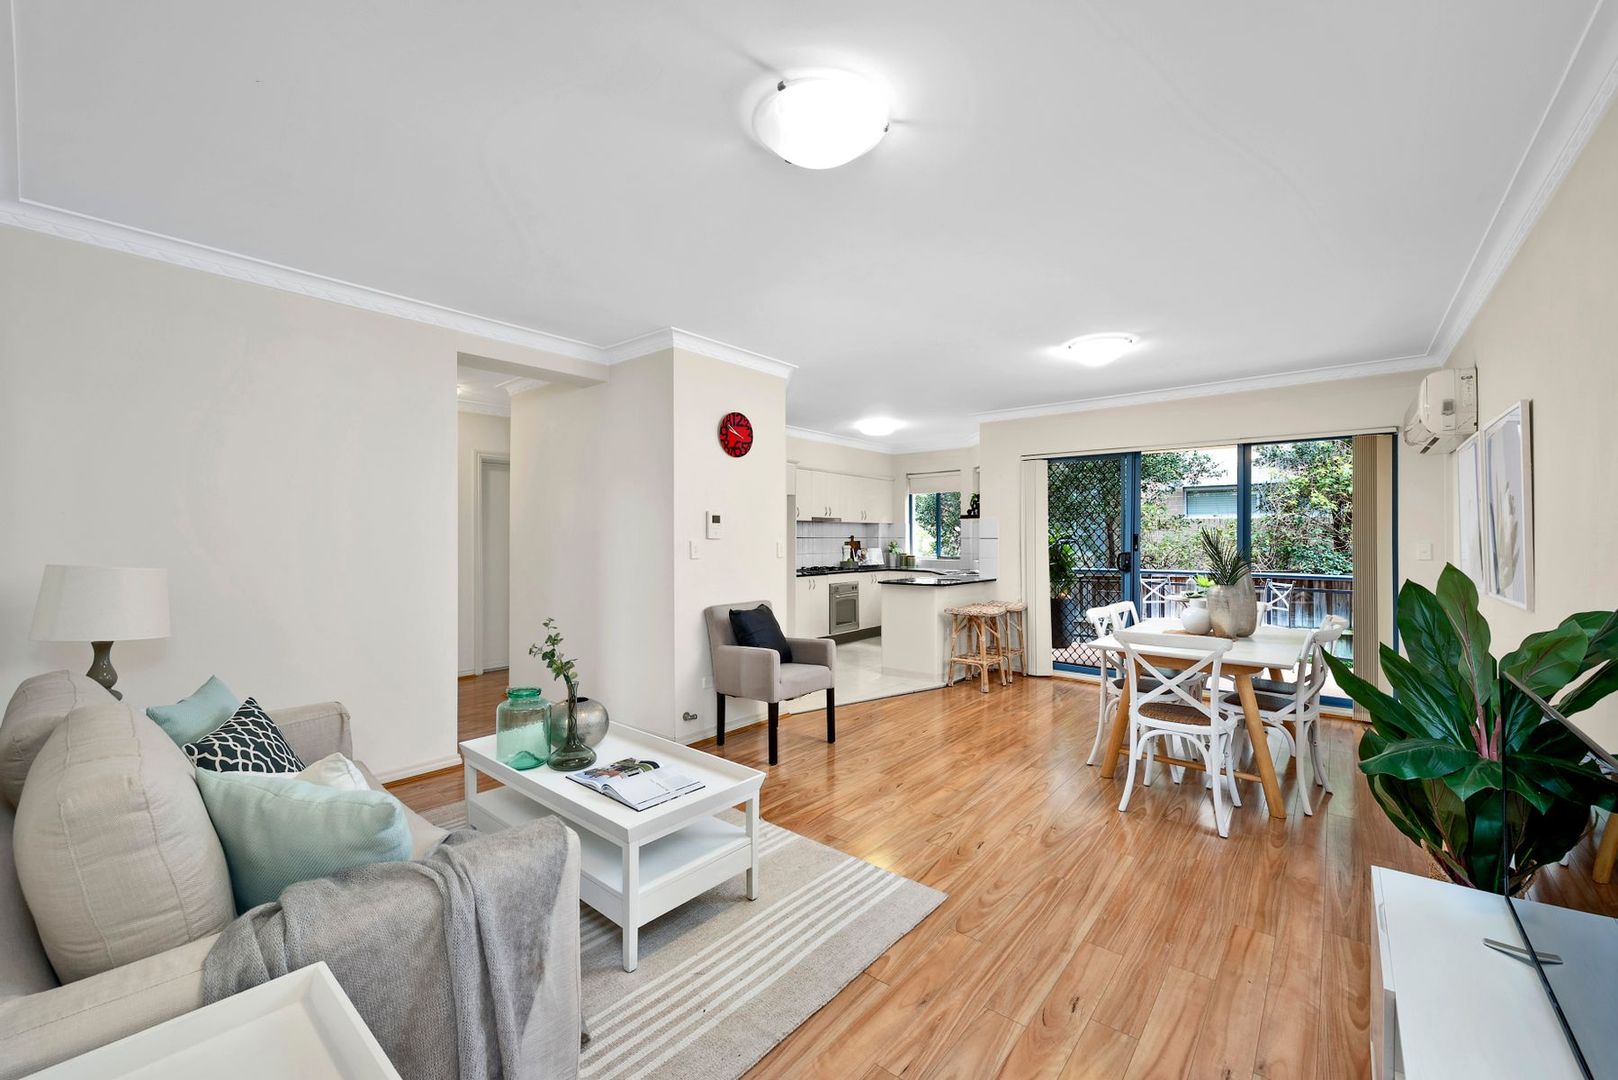 7/557 Mowbray Road West, Lane Cove North NSW 2066